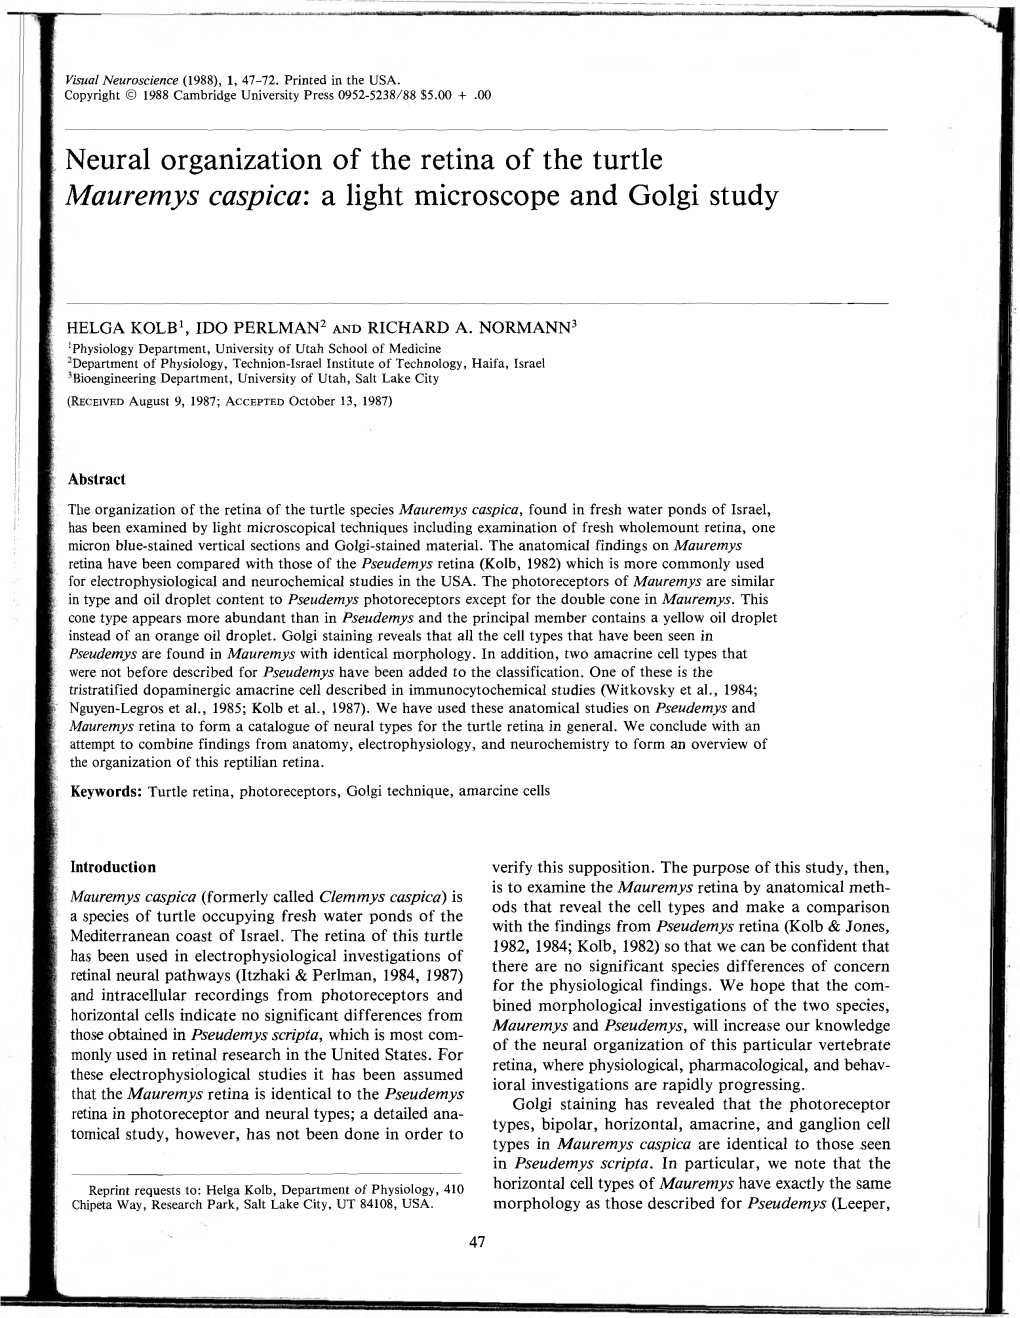 Neural Organization of the Retina of the Turtle Mauremys Caspica: a Light Microscope and Golgi Study